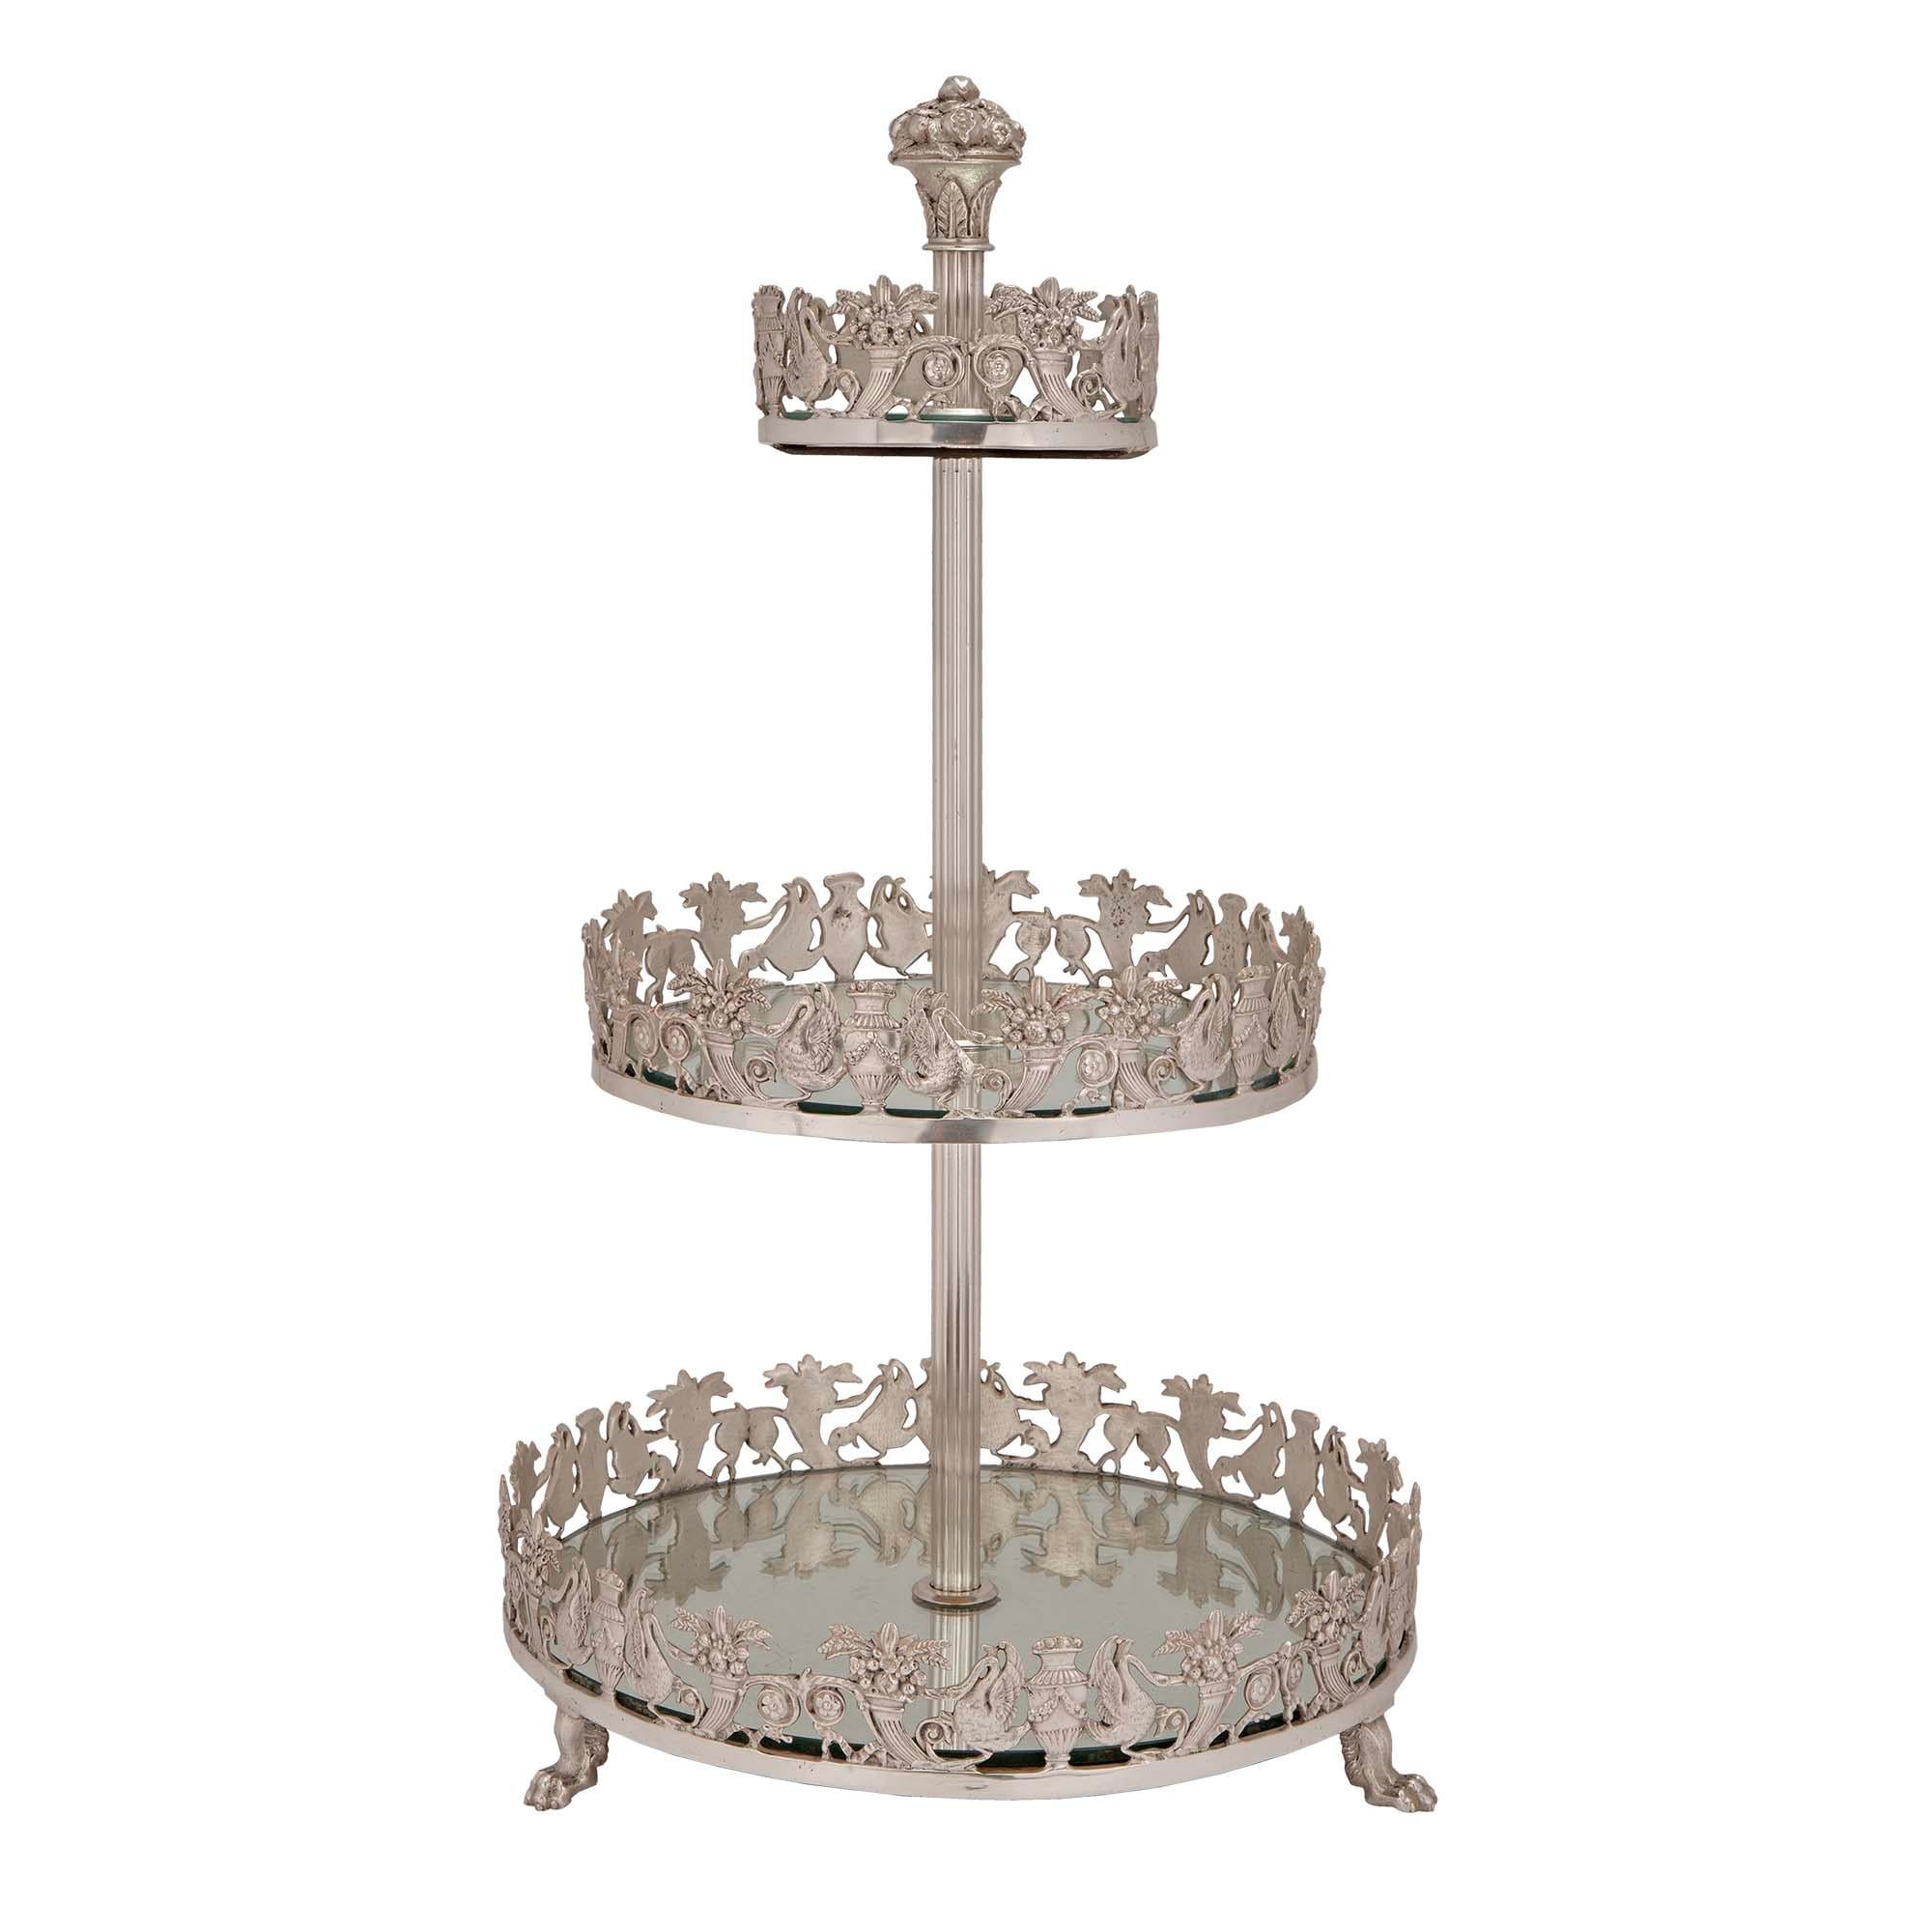 French 19th Century Empire Neoclassical Style Silvered Bronze Three-Tier Platea In Good Condition For Sale In West Palm Beach, FL